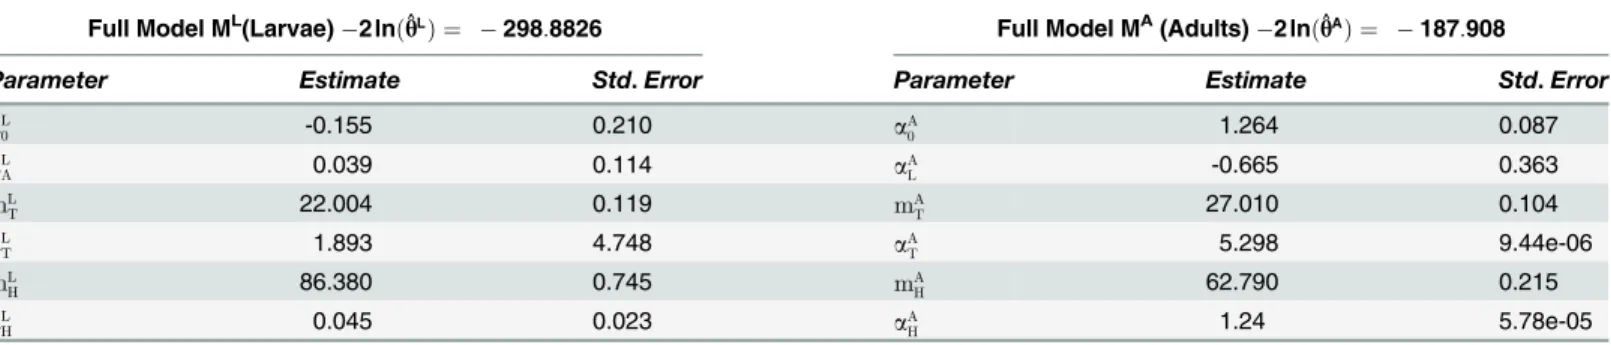 Table 1. Parameter estimates in full models for larva and adult presence in relation to climatic and other covariates.